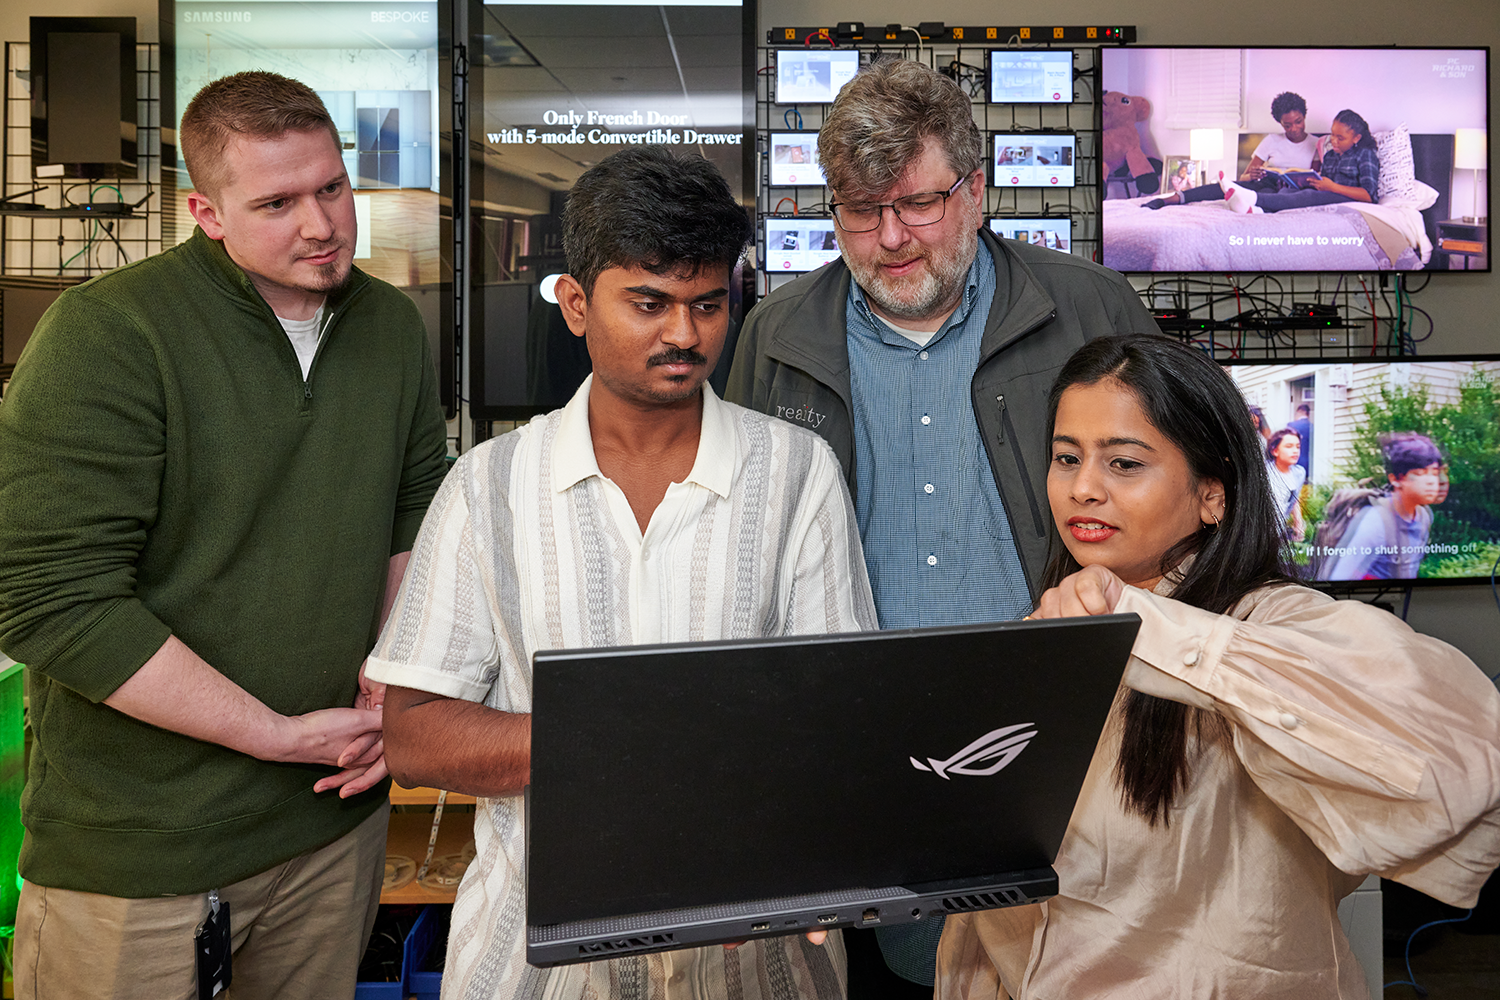 Students and a faculty member gather in front of a laptop.